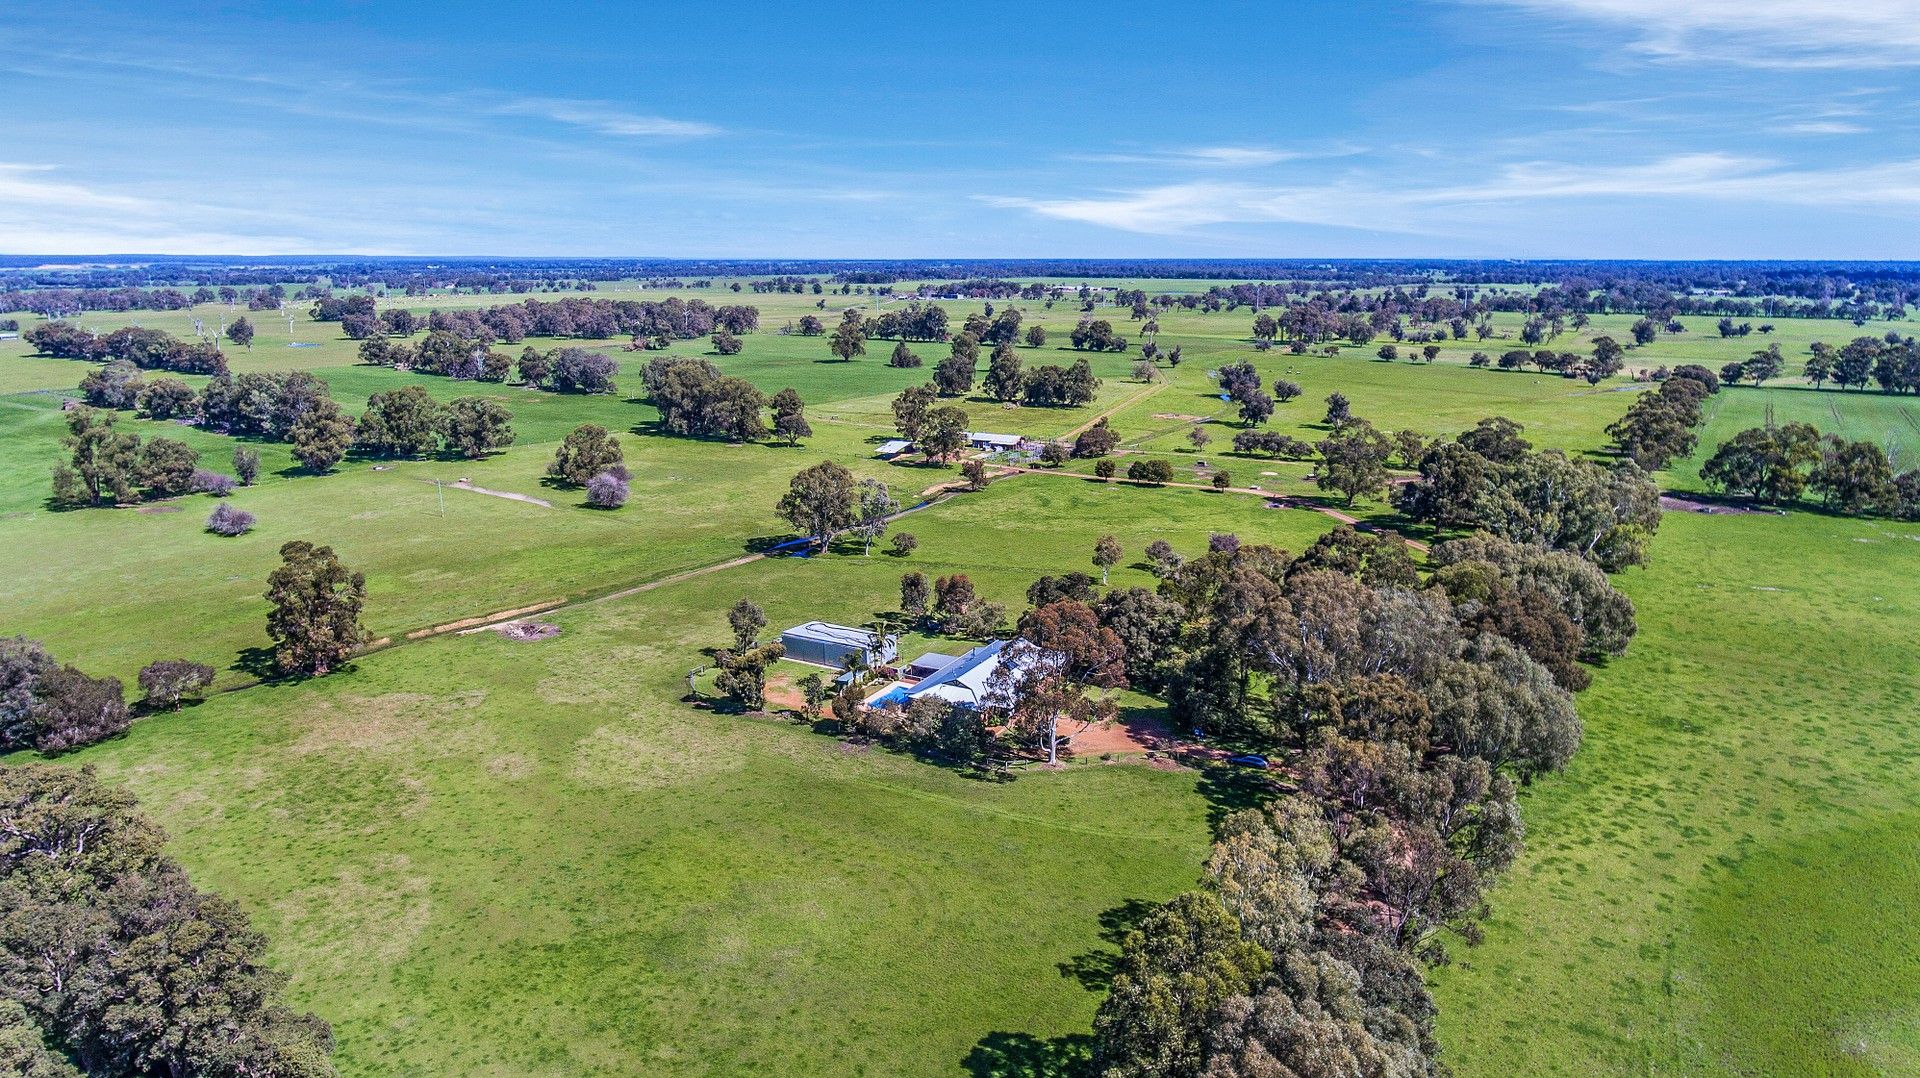 5 bedrooms Farm in 94 Reilly Road BOYANUP WA, 6237